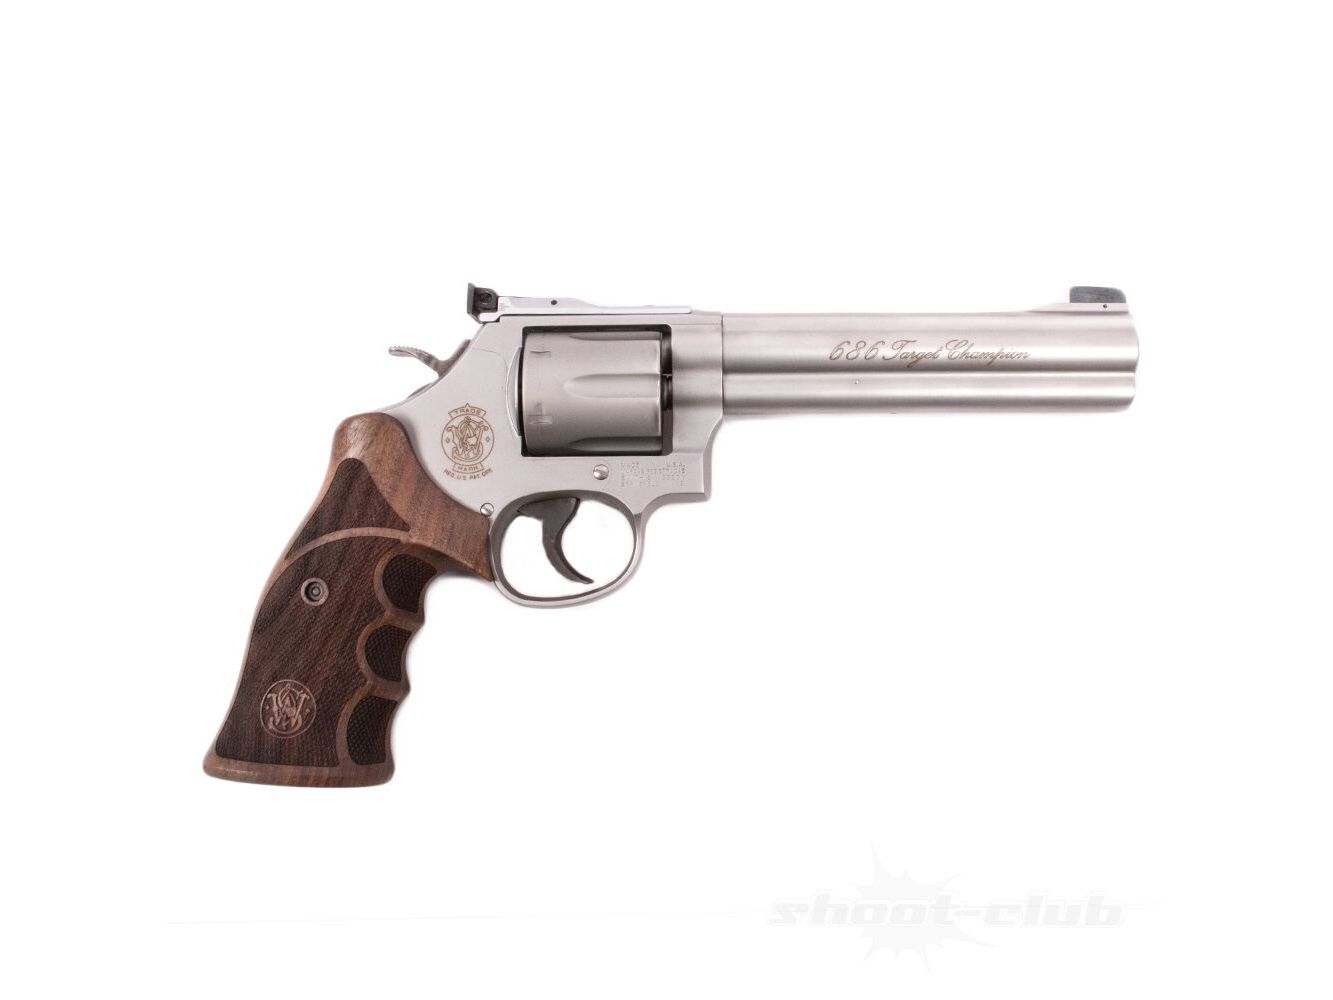 Smith & Wesson	 Smith&Wesson 686 Target Champion